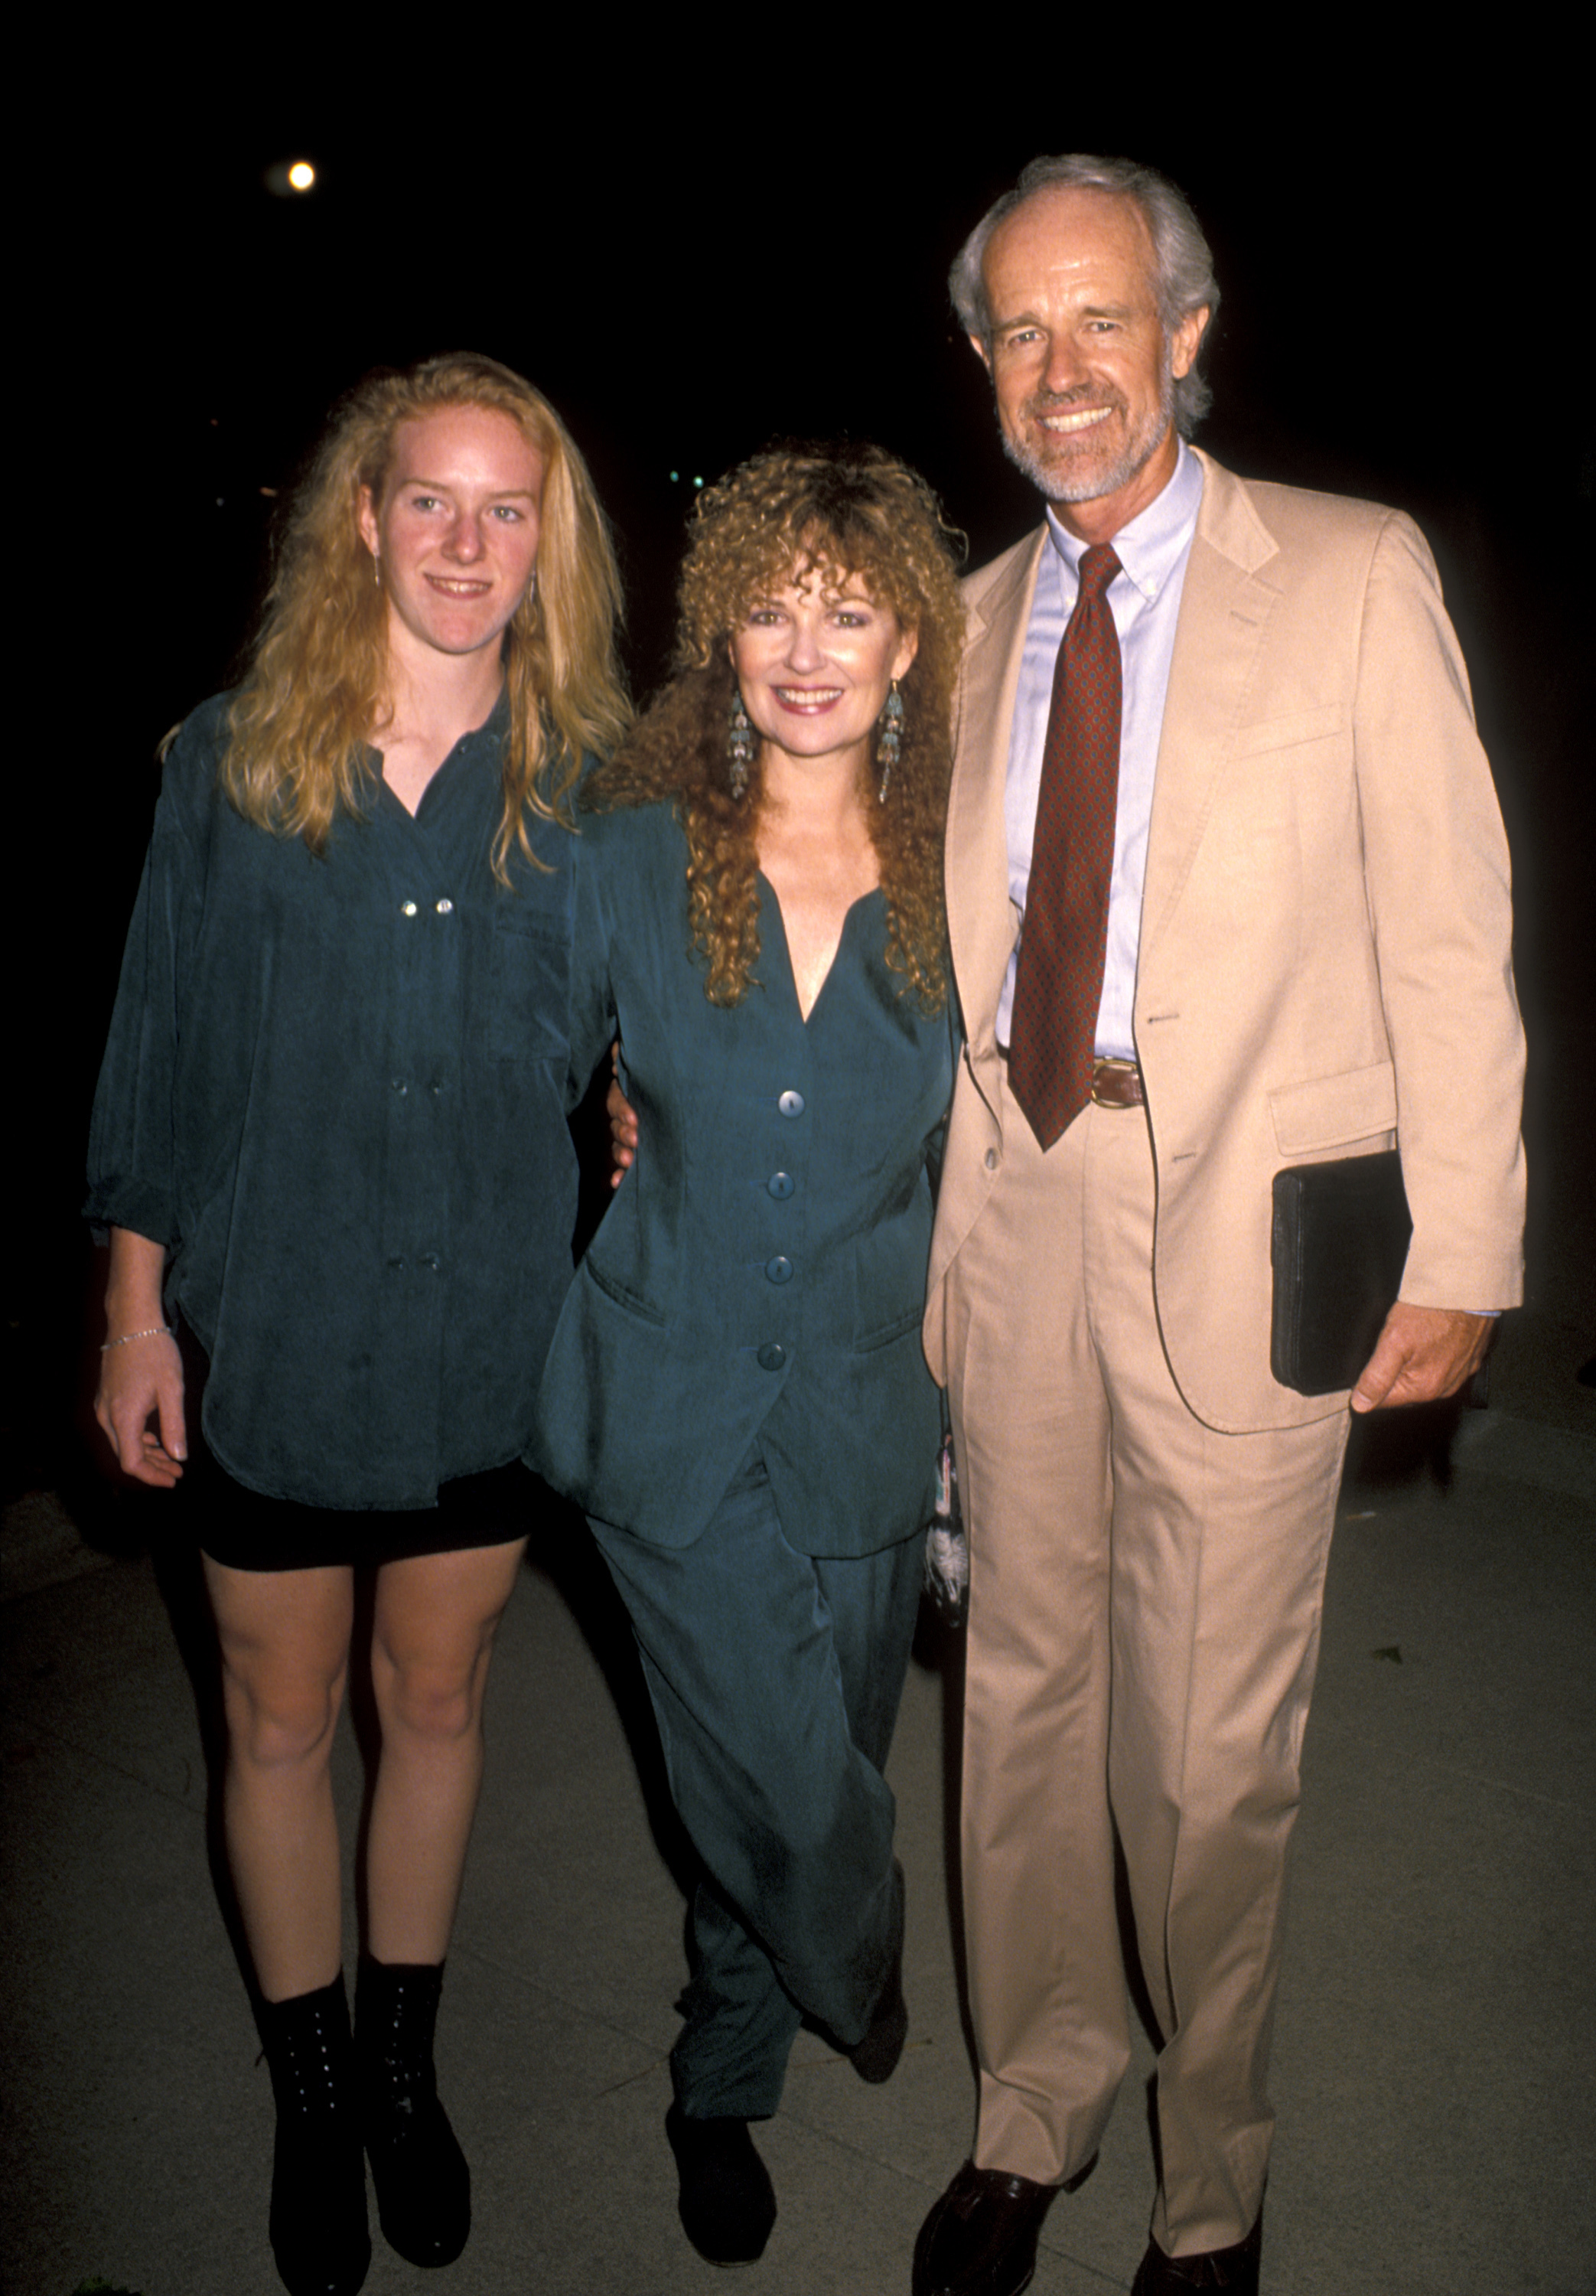 Shelly Fabares, Mike Farrell, and daughter Erin Farrell attend the "ABC Fall Premiere Party" at UCLA on September 12, 1990. | Source: Getty Images